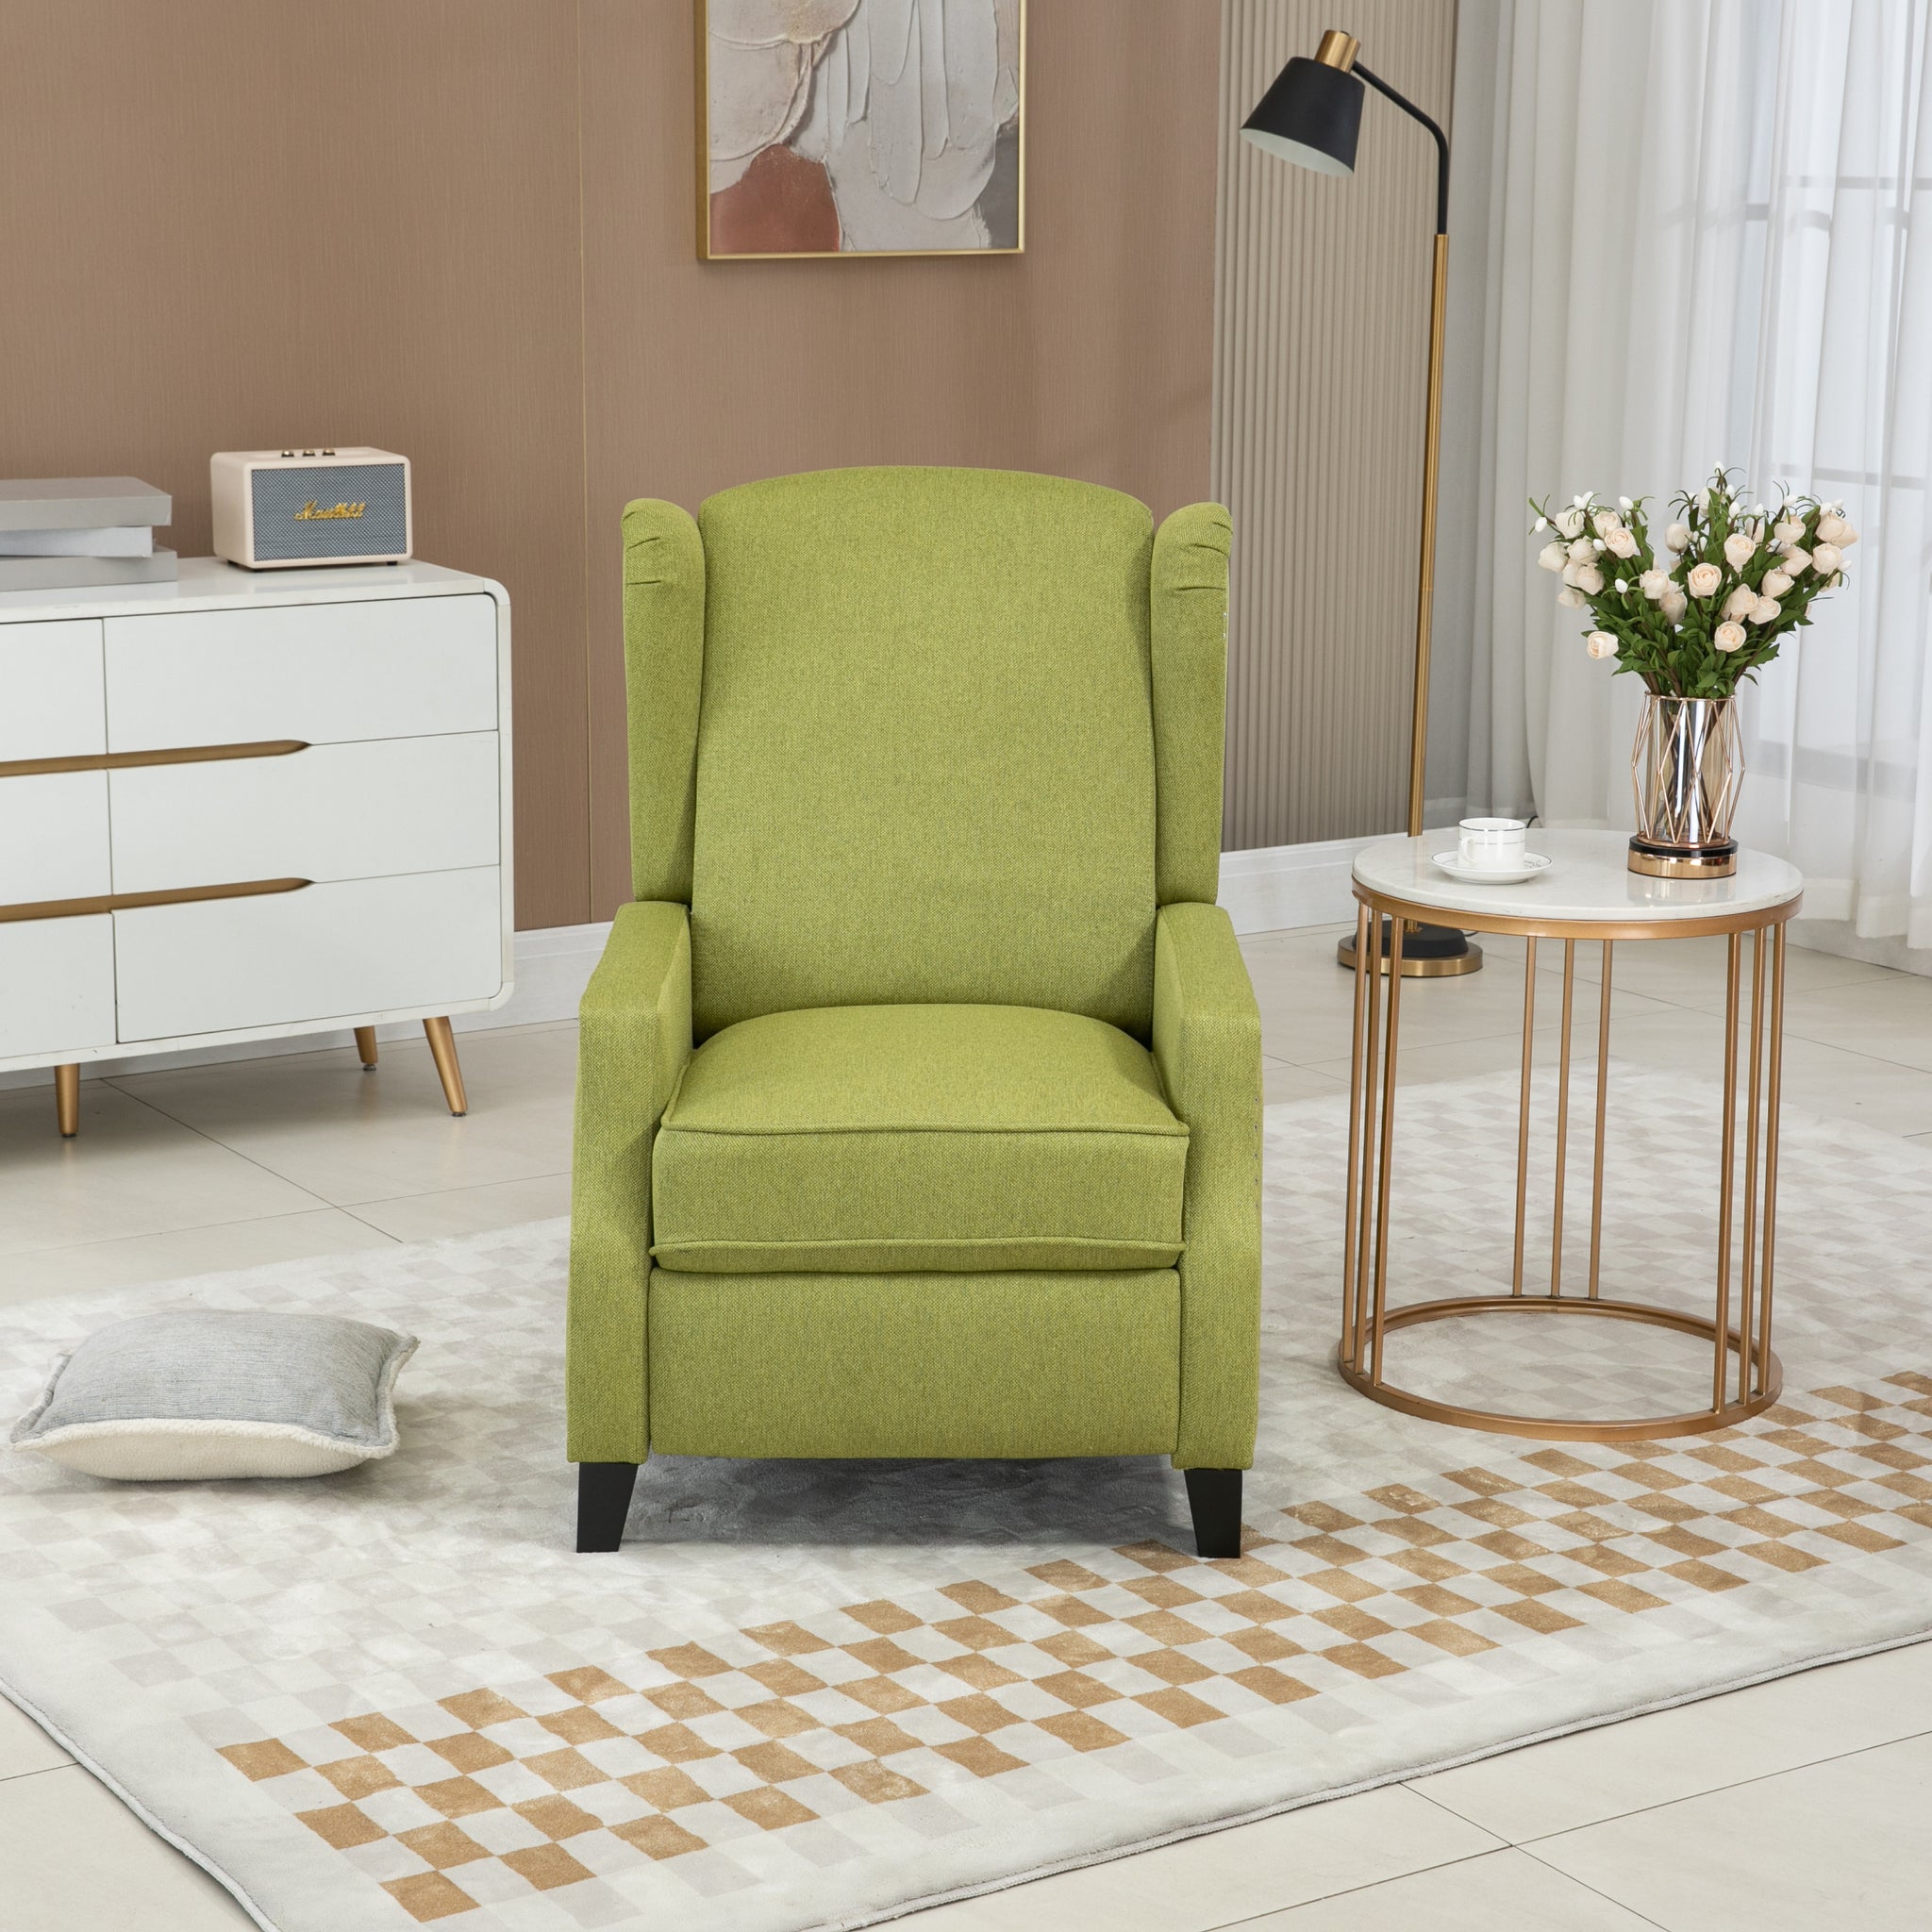 COOLMORE Modern Comfortable Upholstered leisure chair olive green-linen